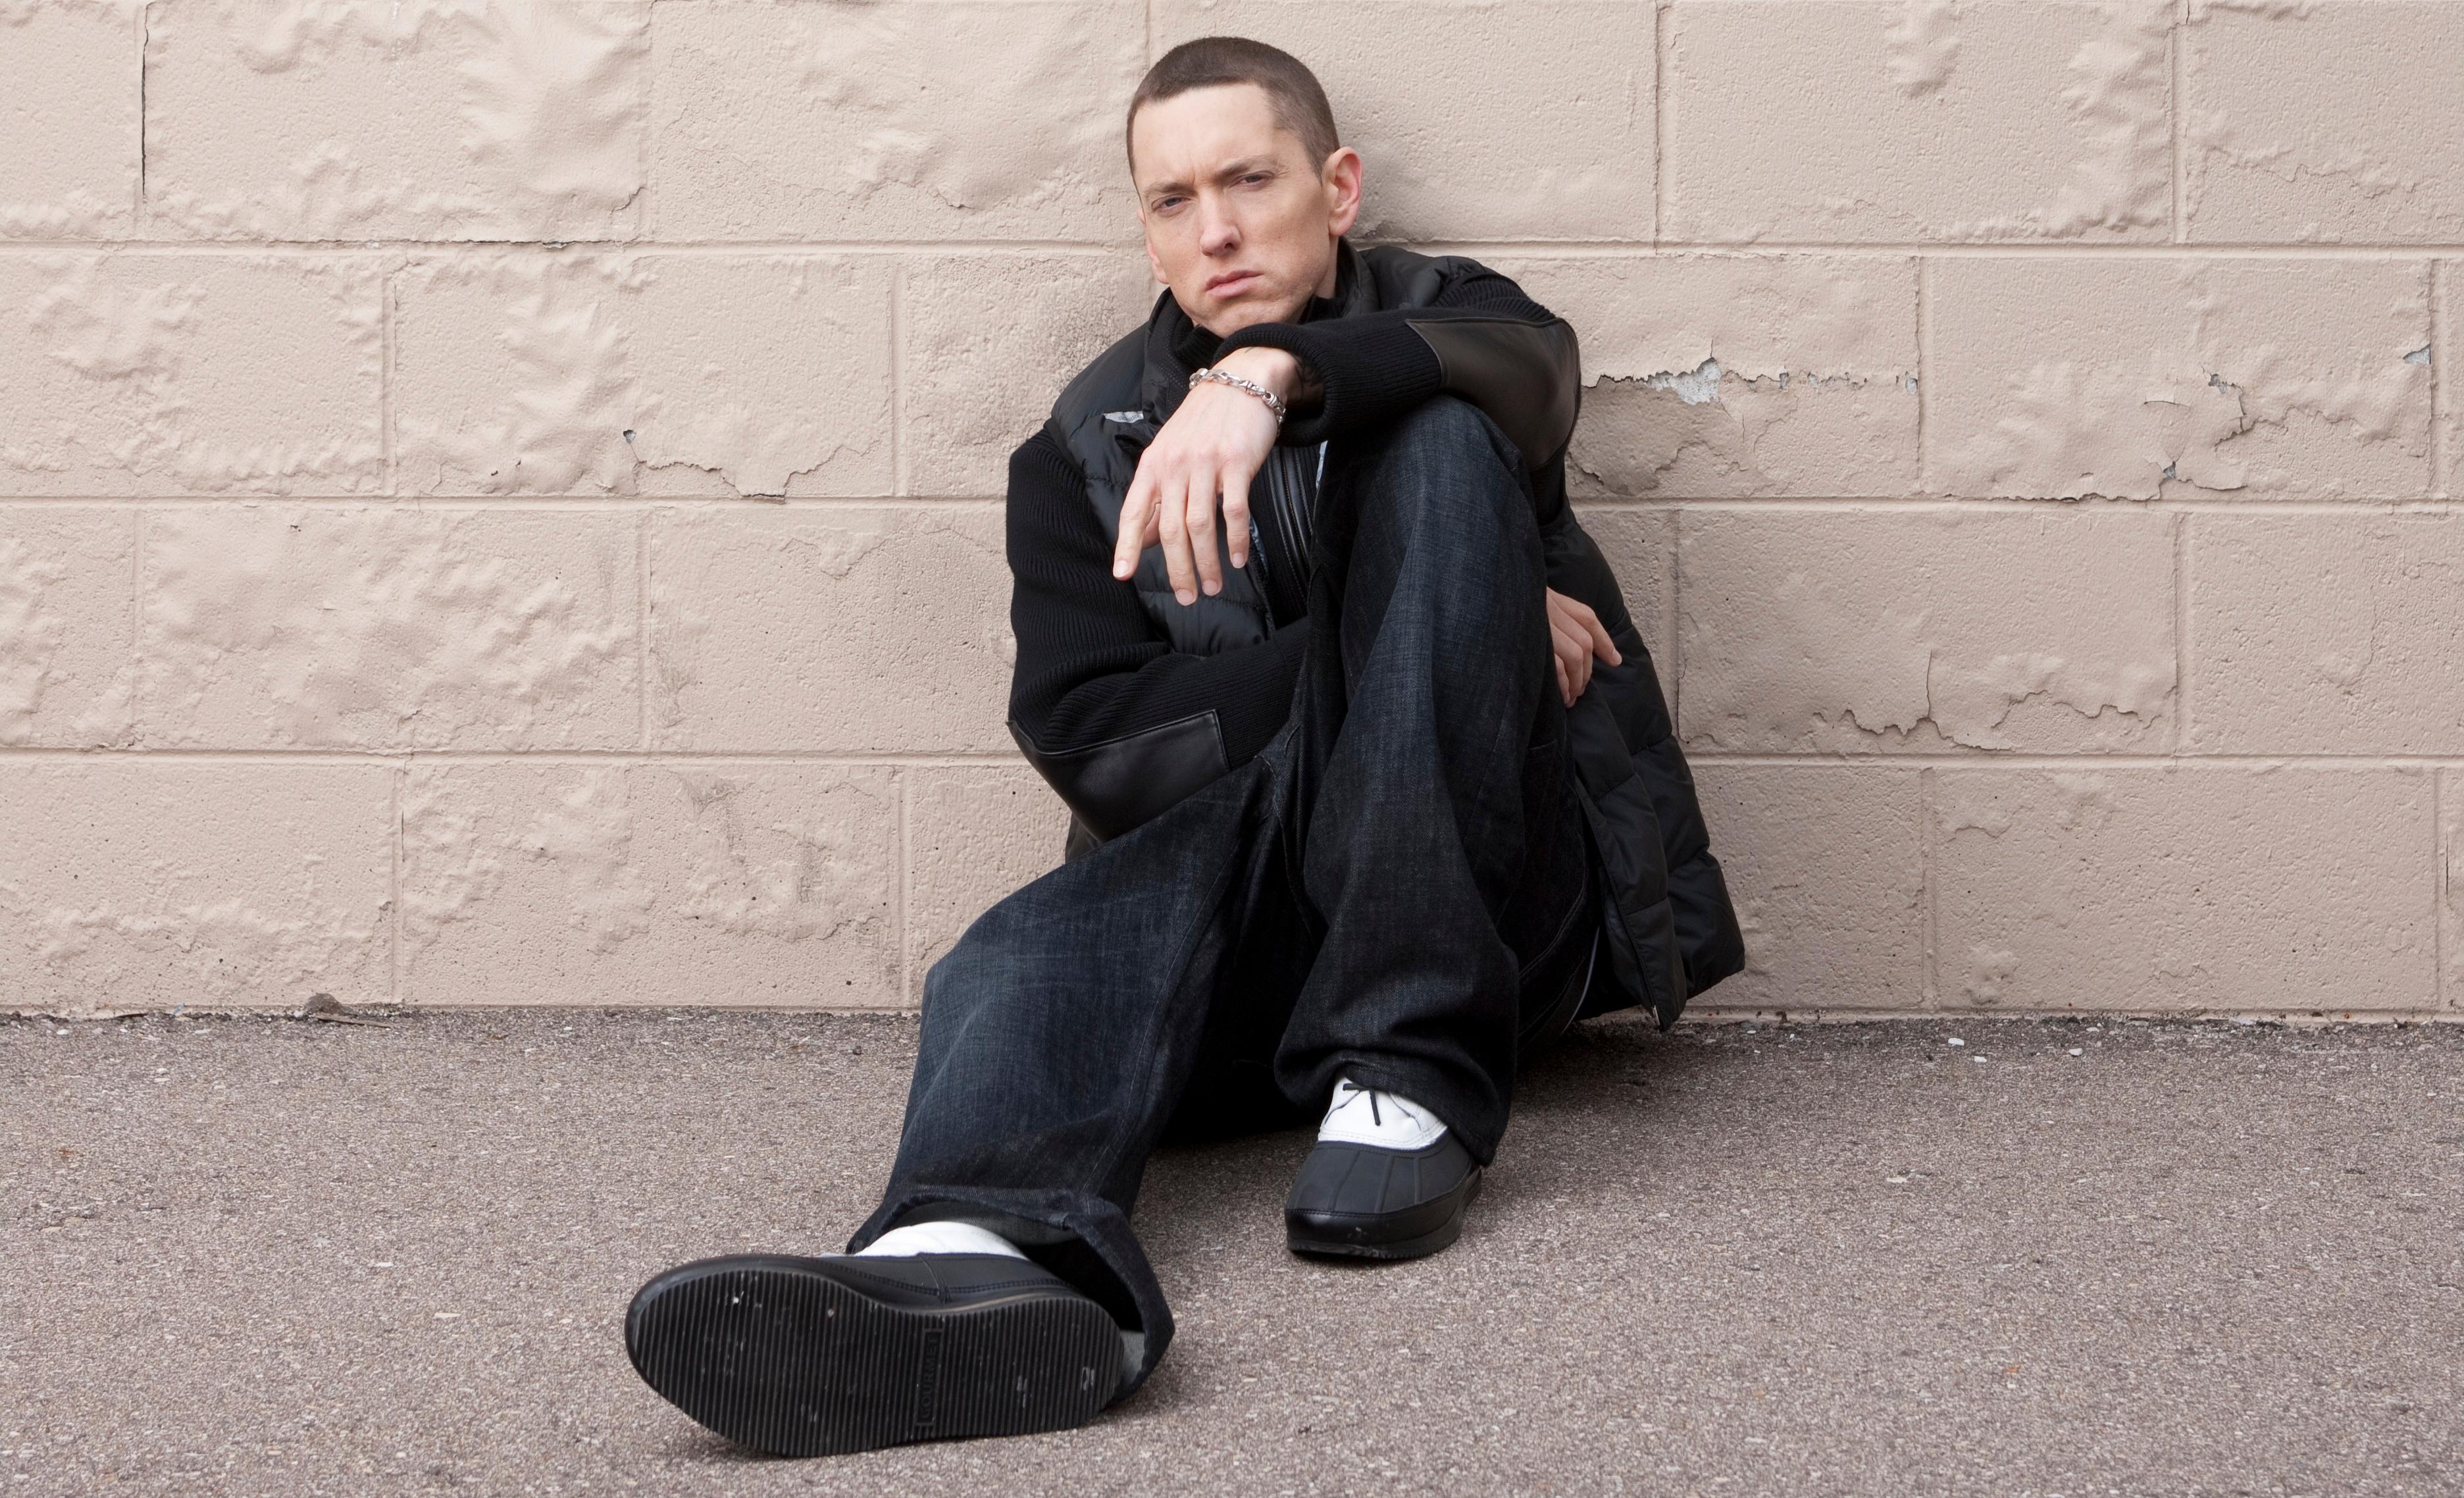 Rapper Eminem sits against the wall